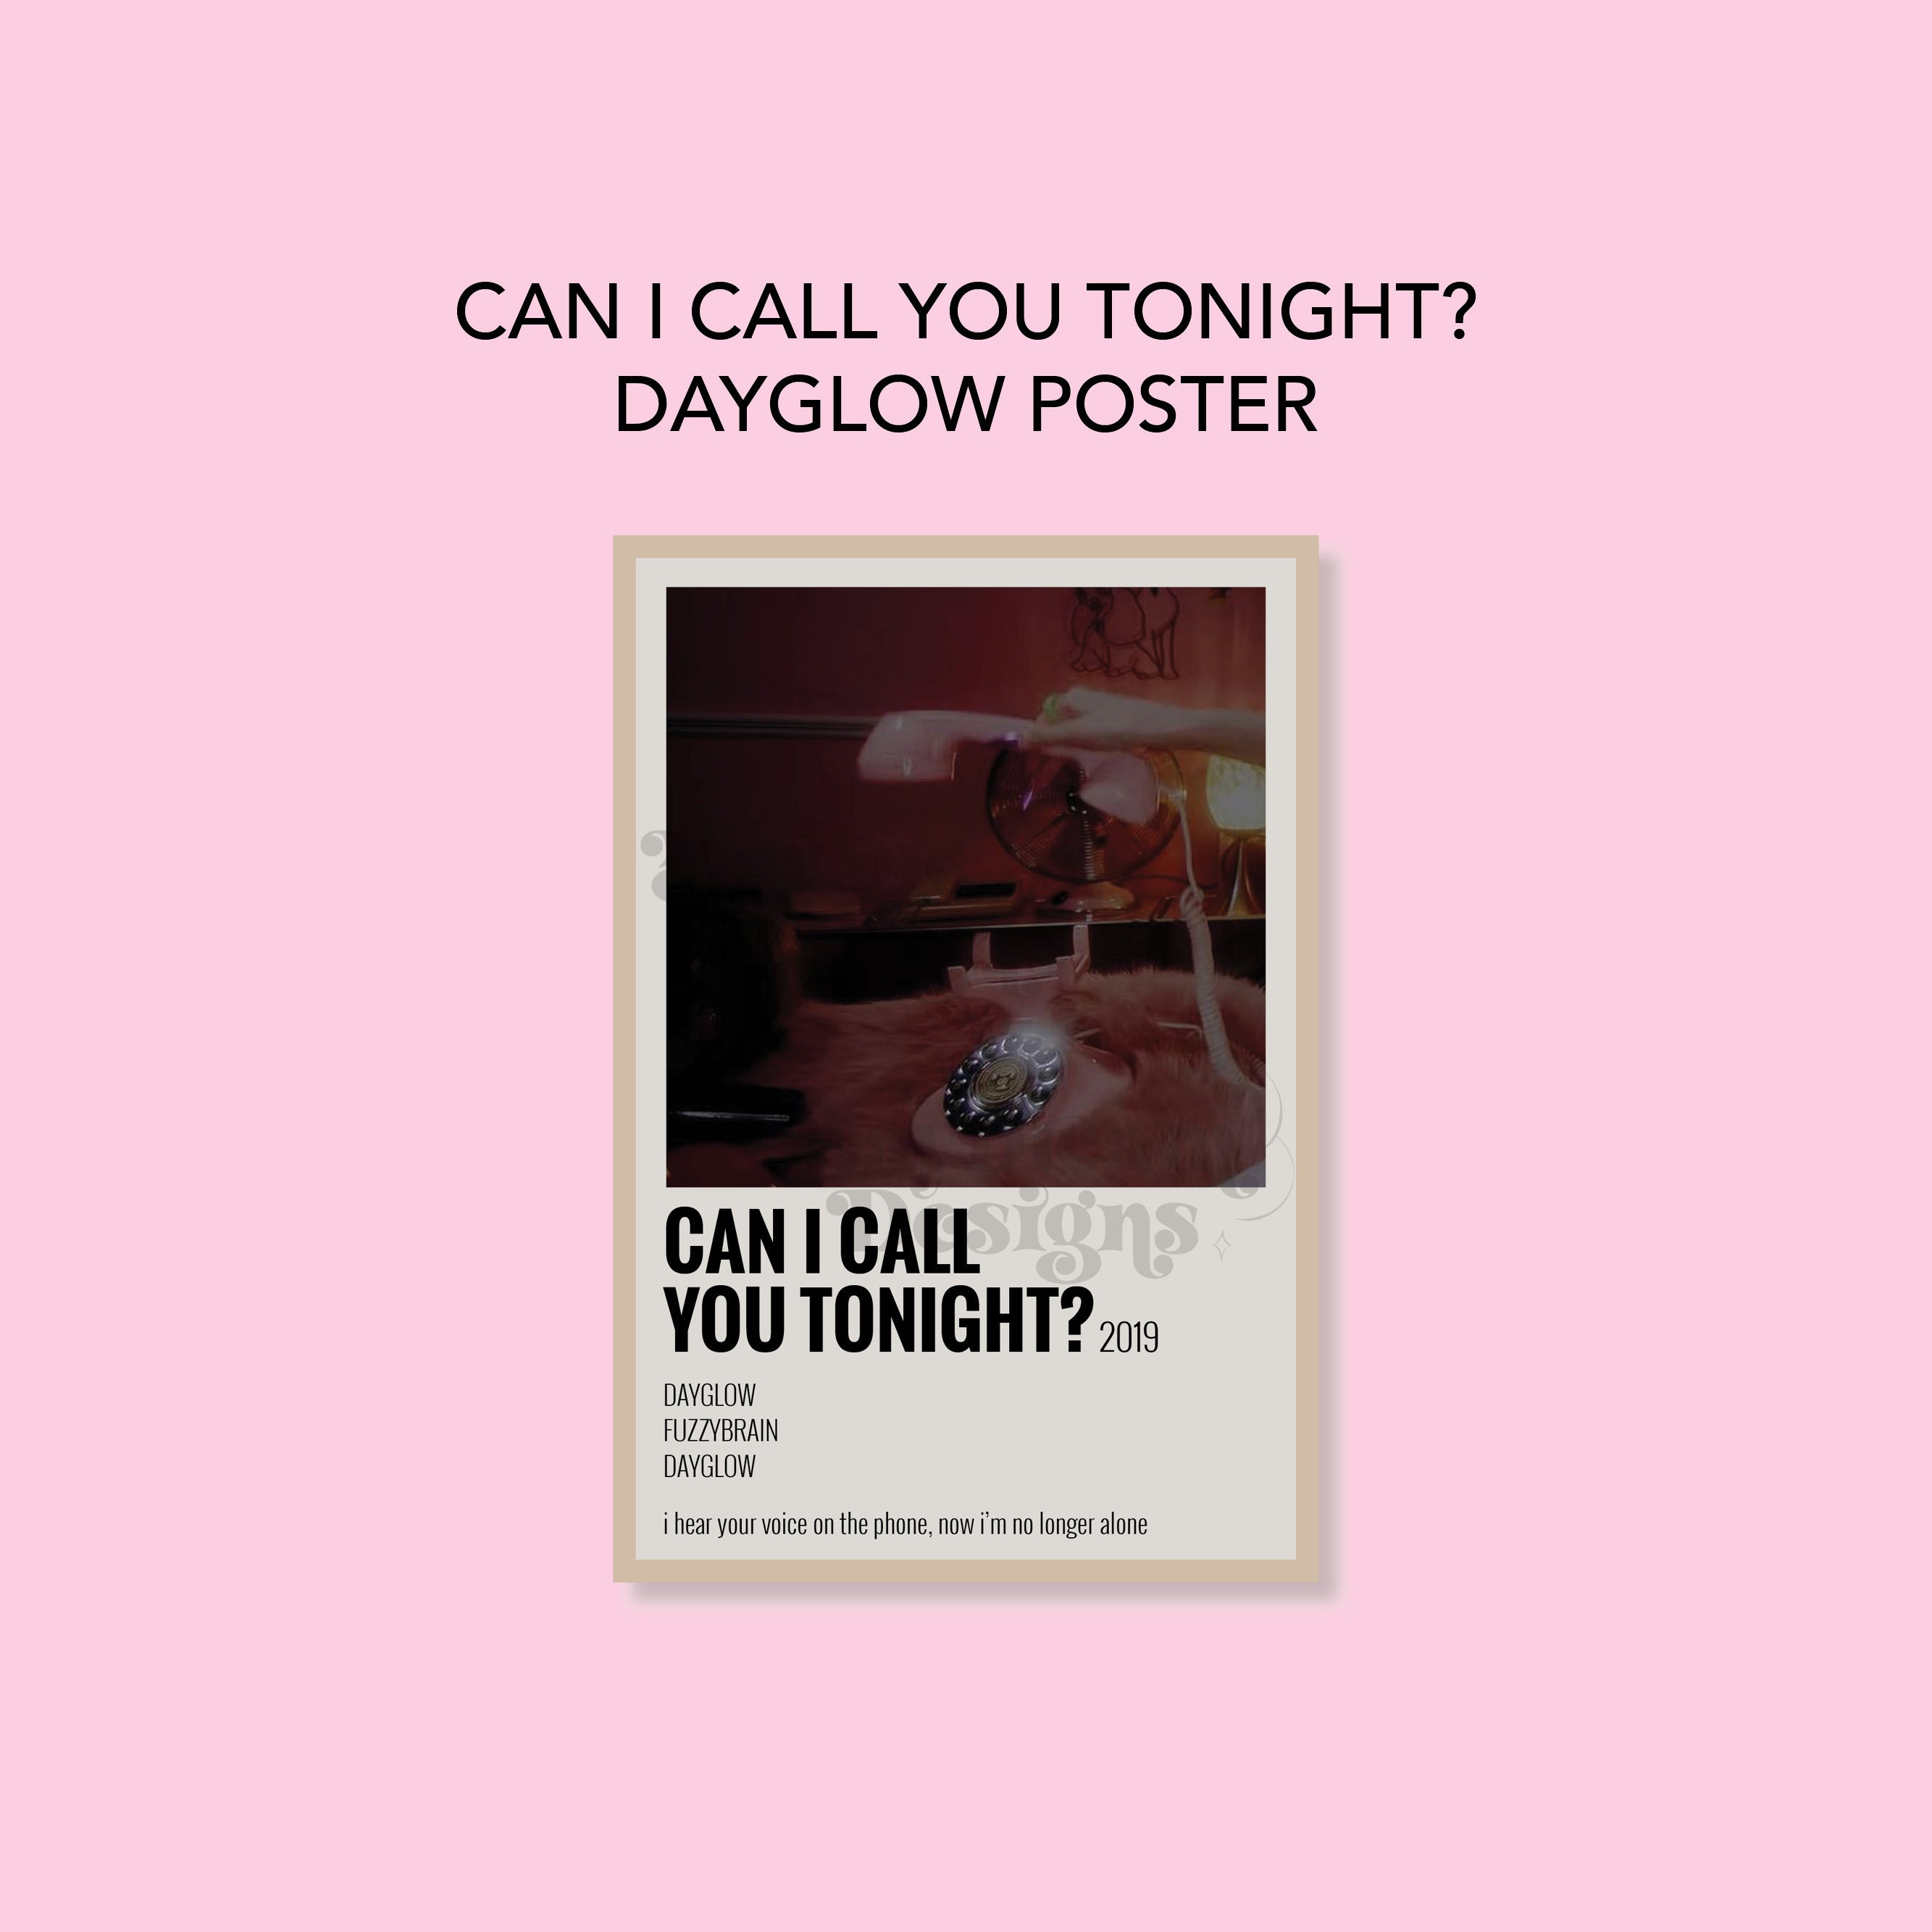 Cal I call You Tonight? by- Dayglow